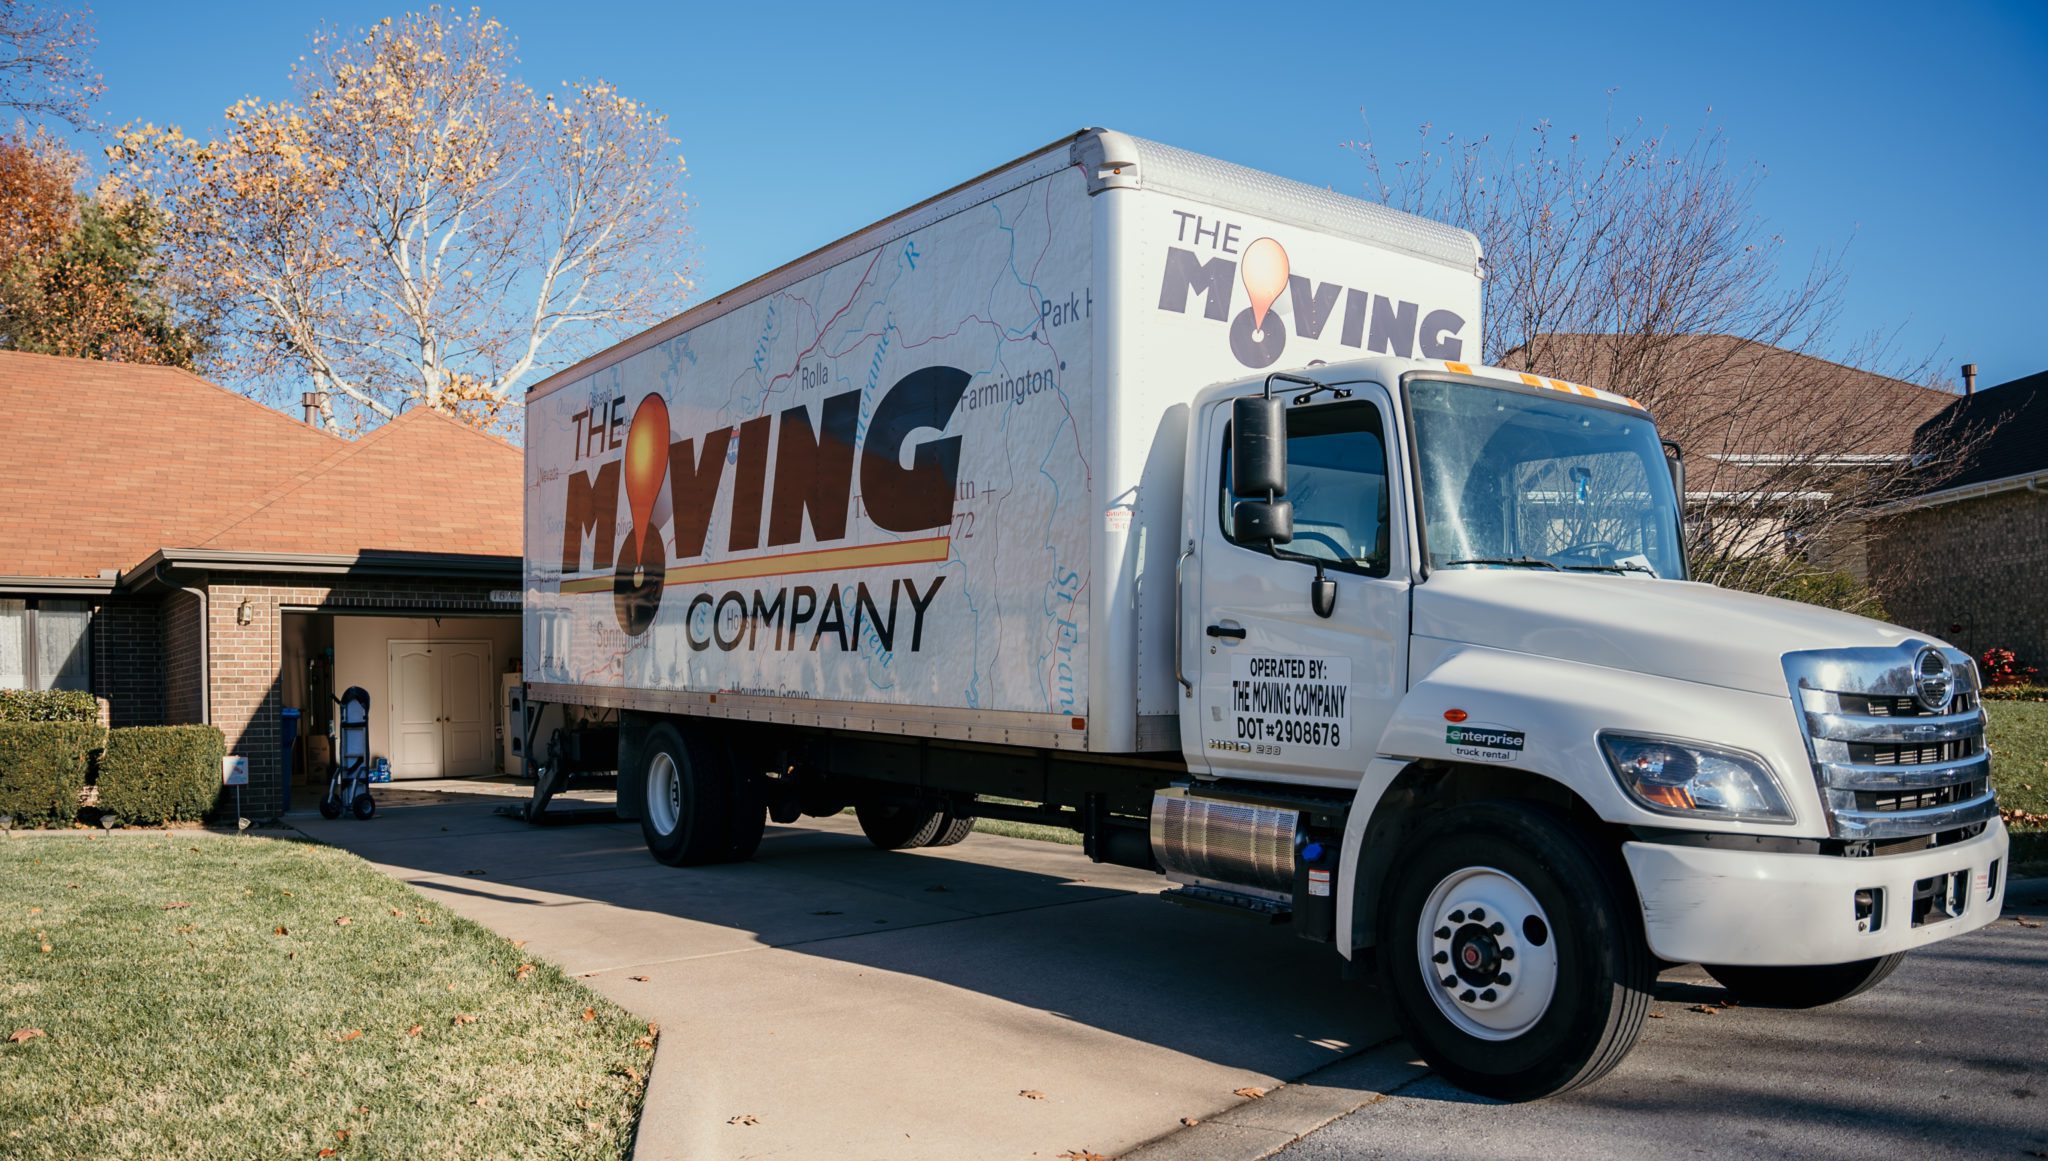 Moving Company Truck at a Residence